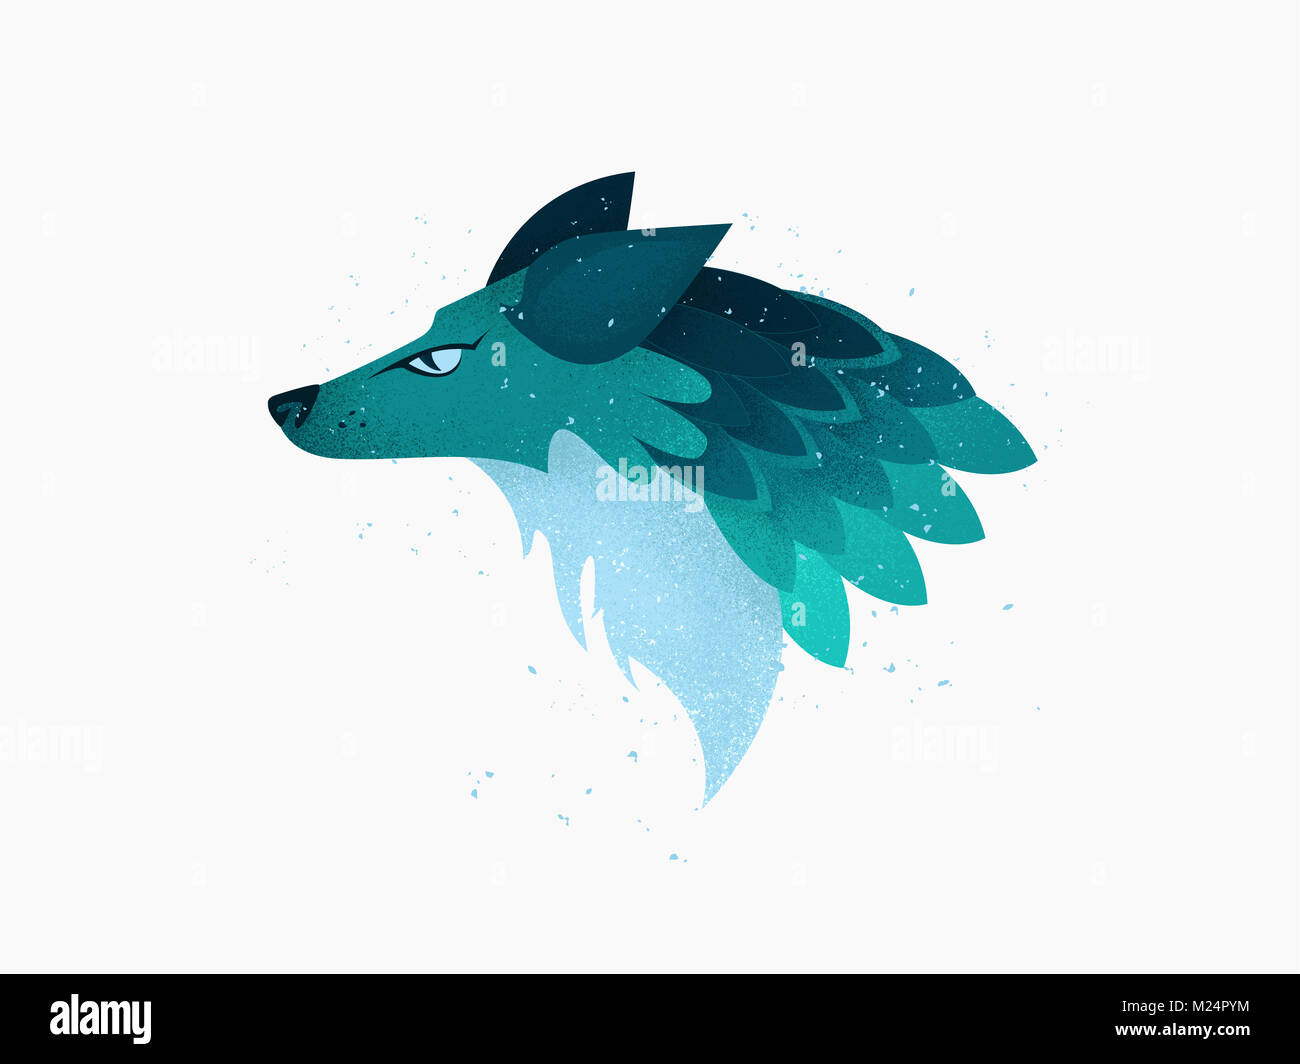 Illustration: A Head of Imaginary Wolf or Fox or Dog Animal in Blue and Turquoise Colors with Shades and Texture. Stock Photo